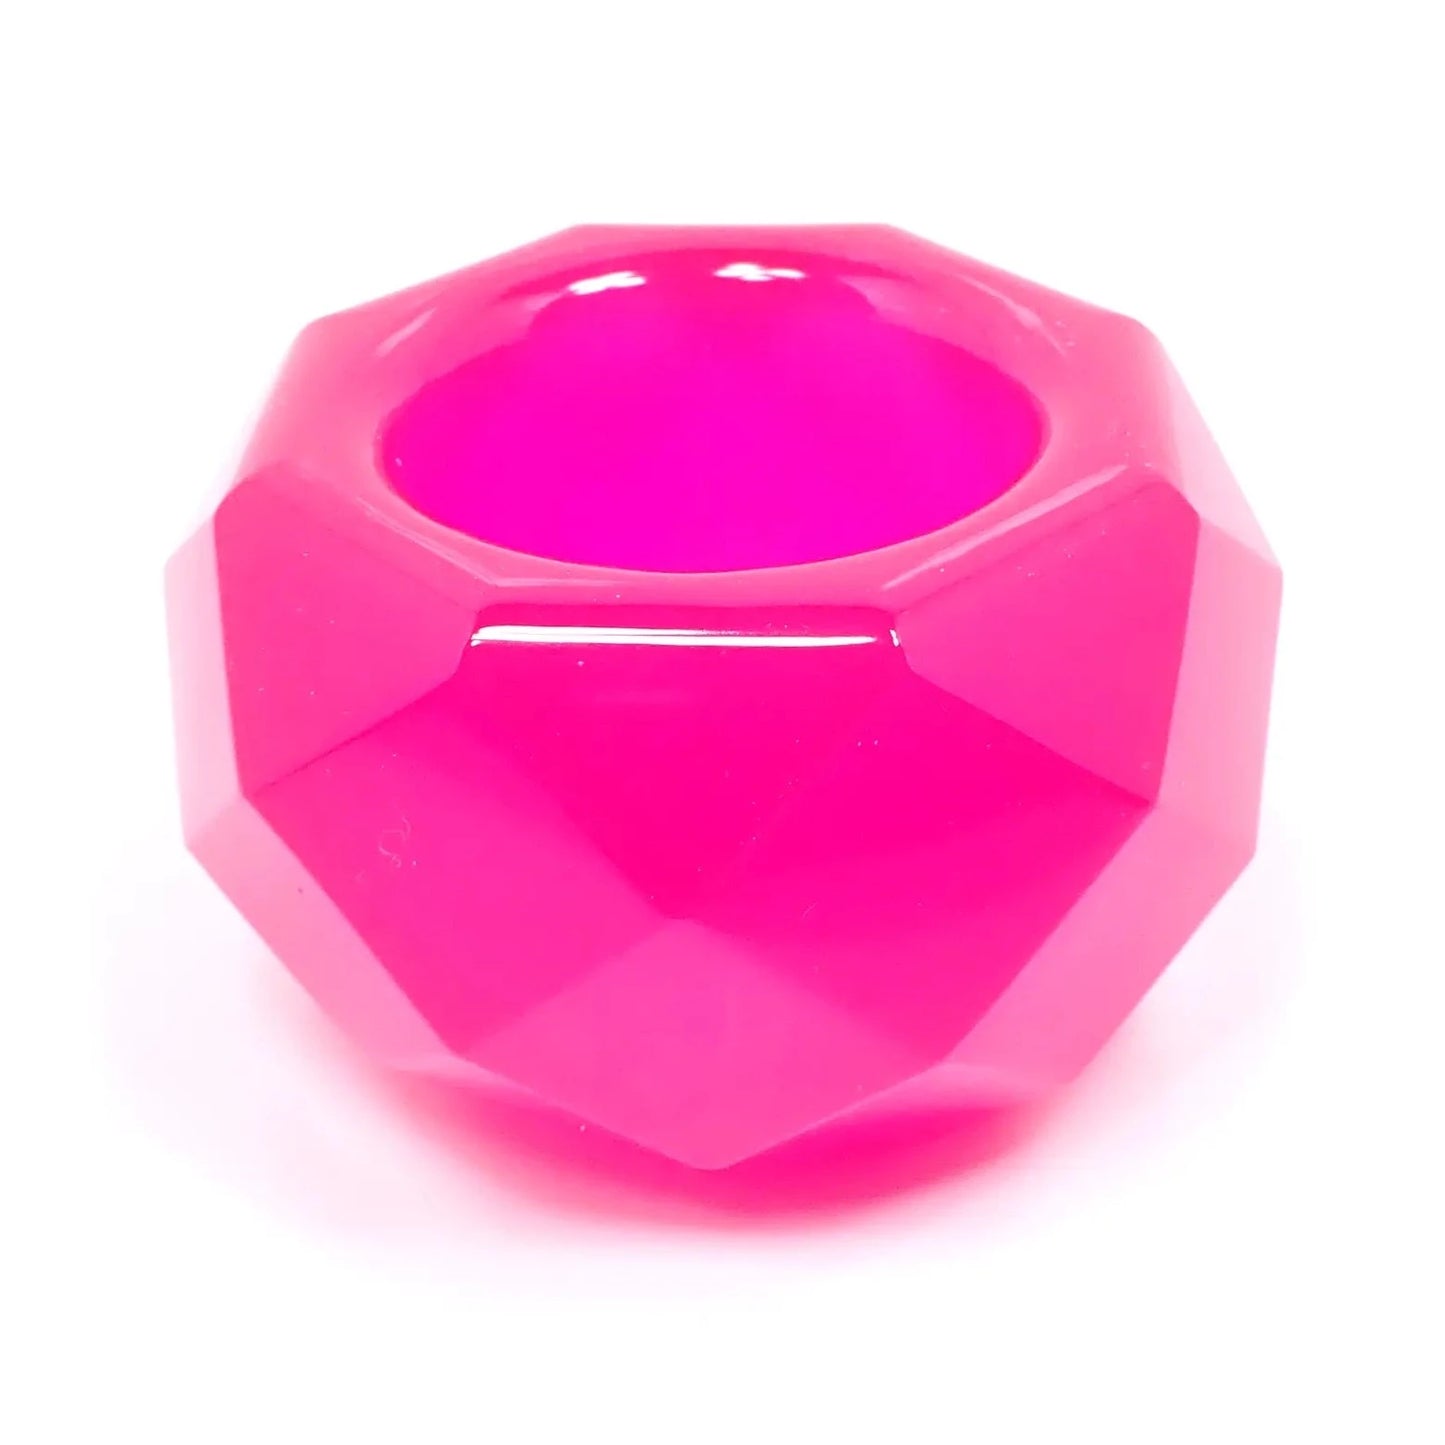 Side view of the small handmade resin geometric succulent pot. The resin is neon pink in color. The piece is shaped like a bowl with an octagon top and faceted edges all the way around. There is a round opening in the middle of the top for small succulents or tiny trinkets.